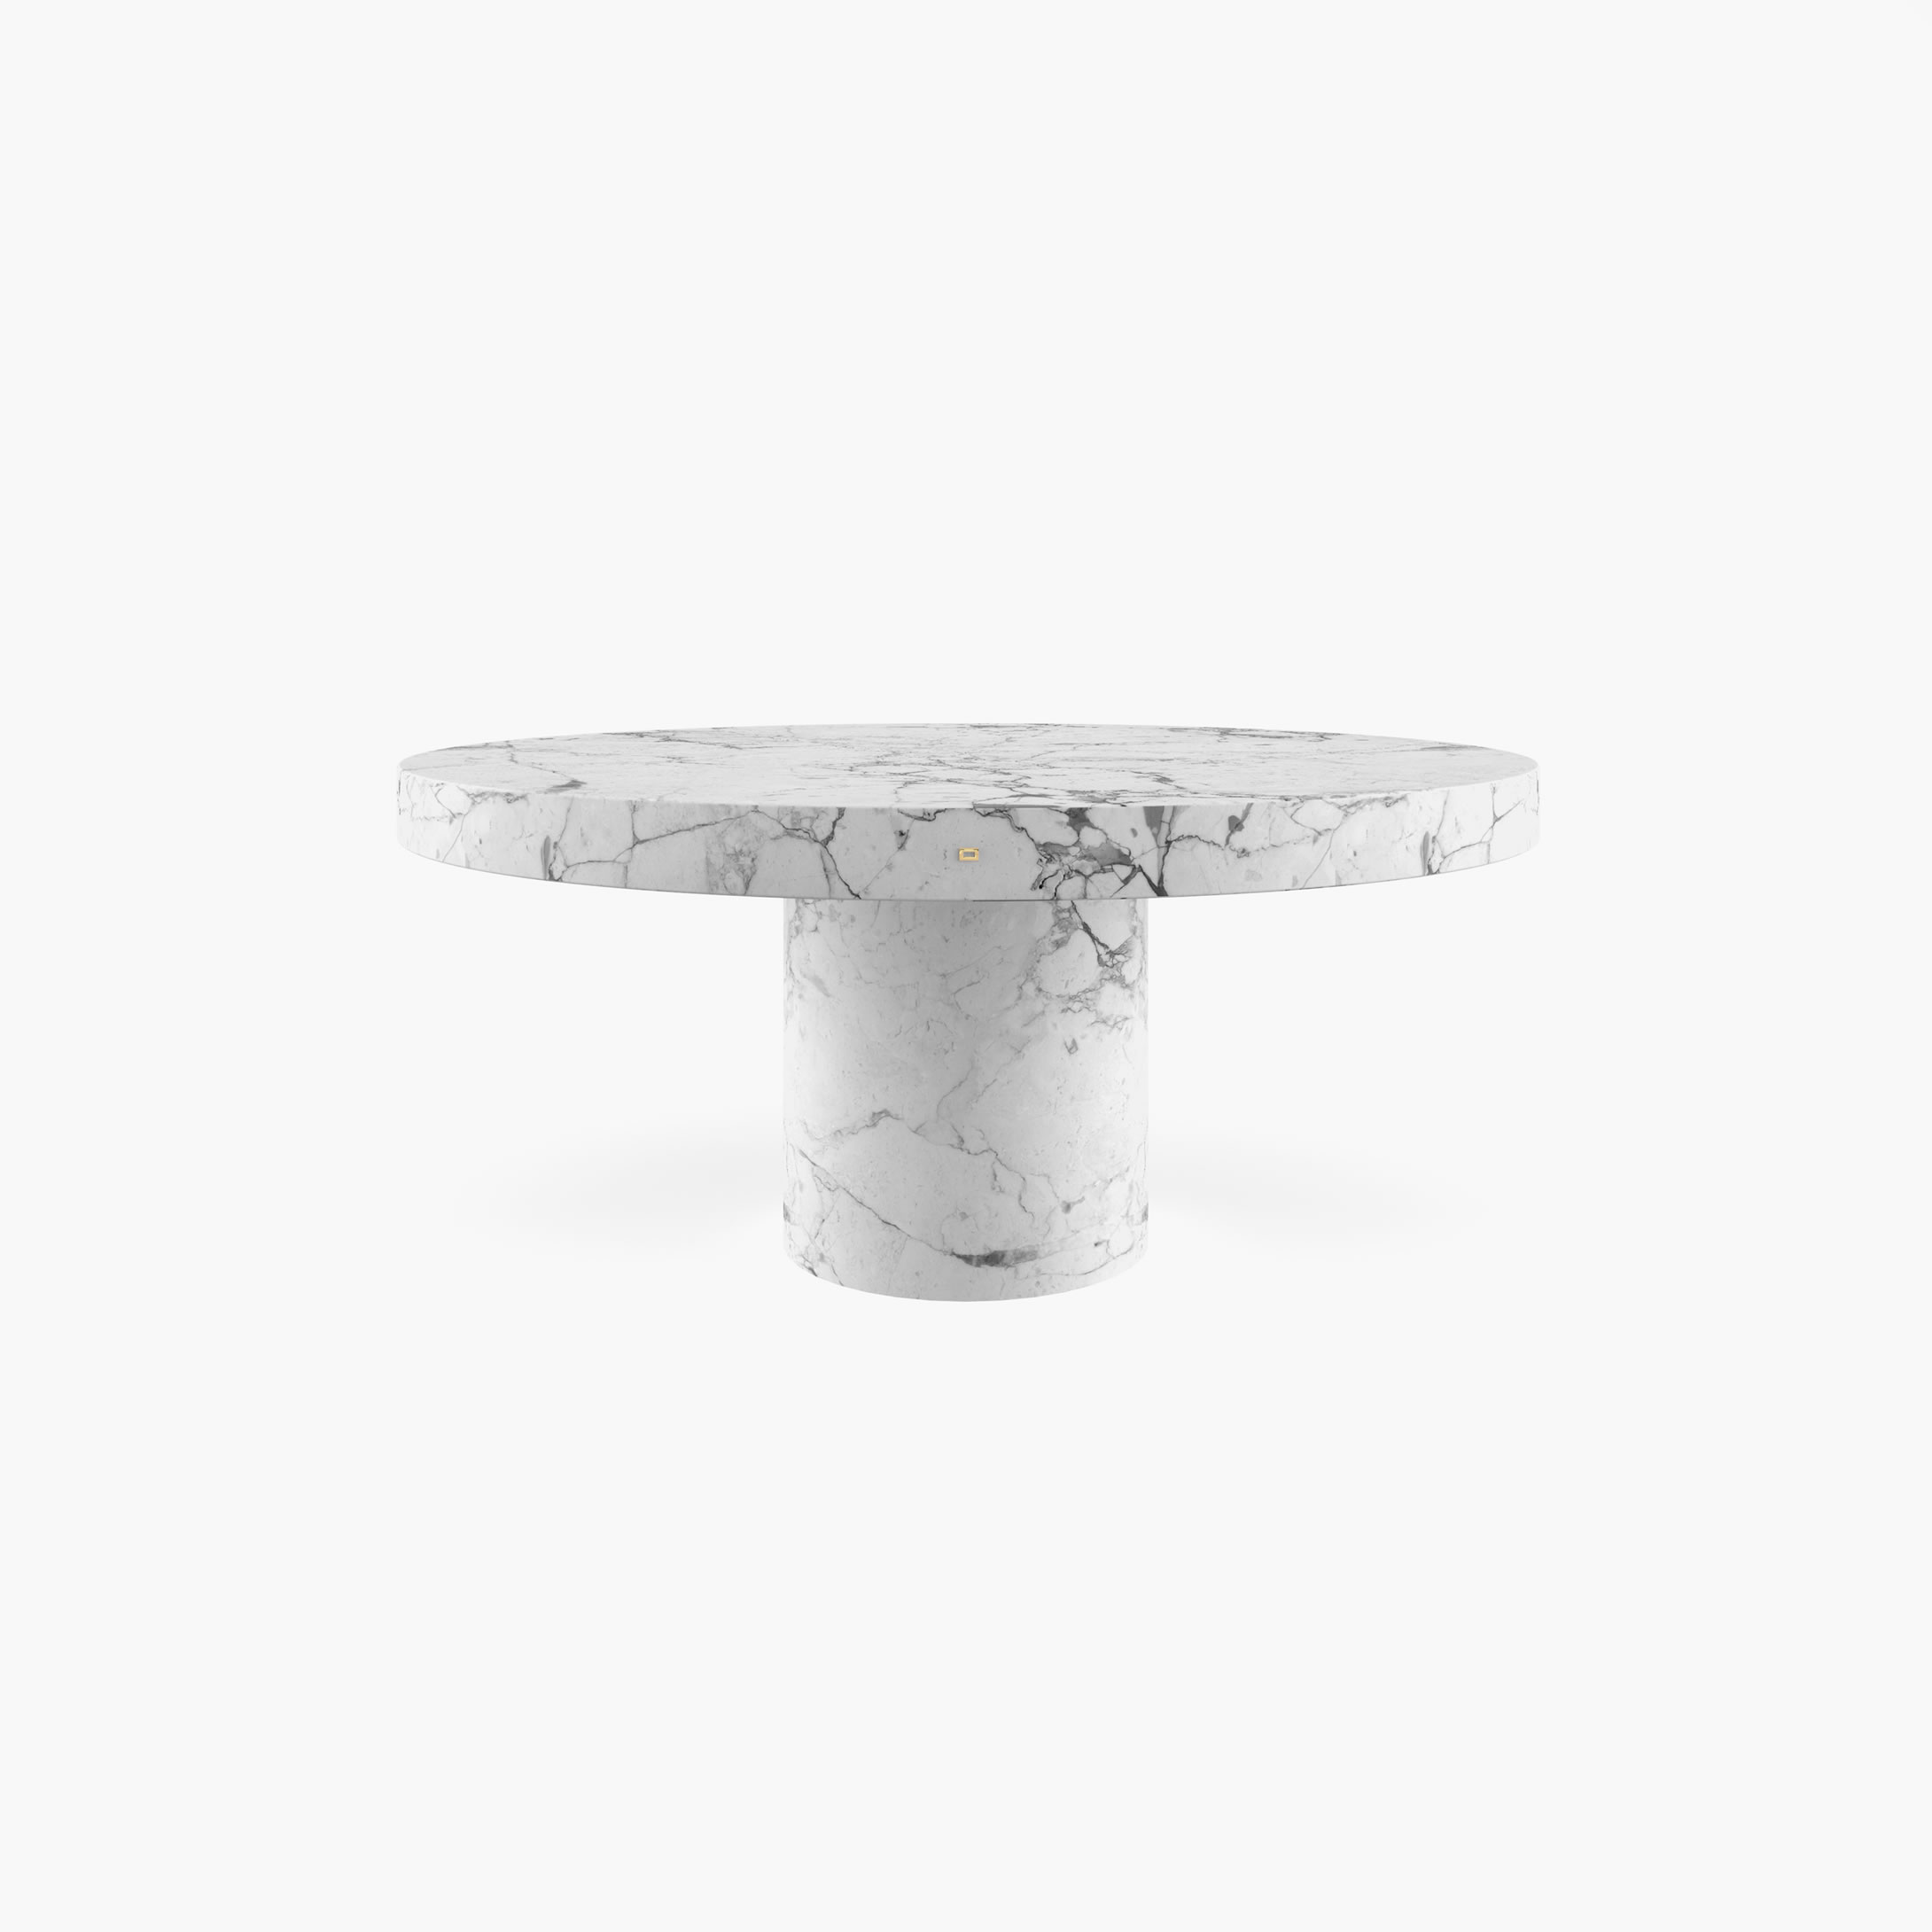 Dining Table round cylindrically perforated cuboid leg White Arabescato Marble beautiful Dining Room piece of art Dining Tables FS 194 B FELIX SCHWAKE